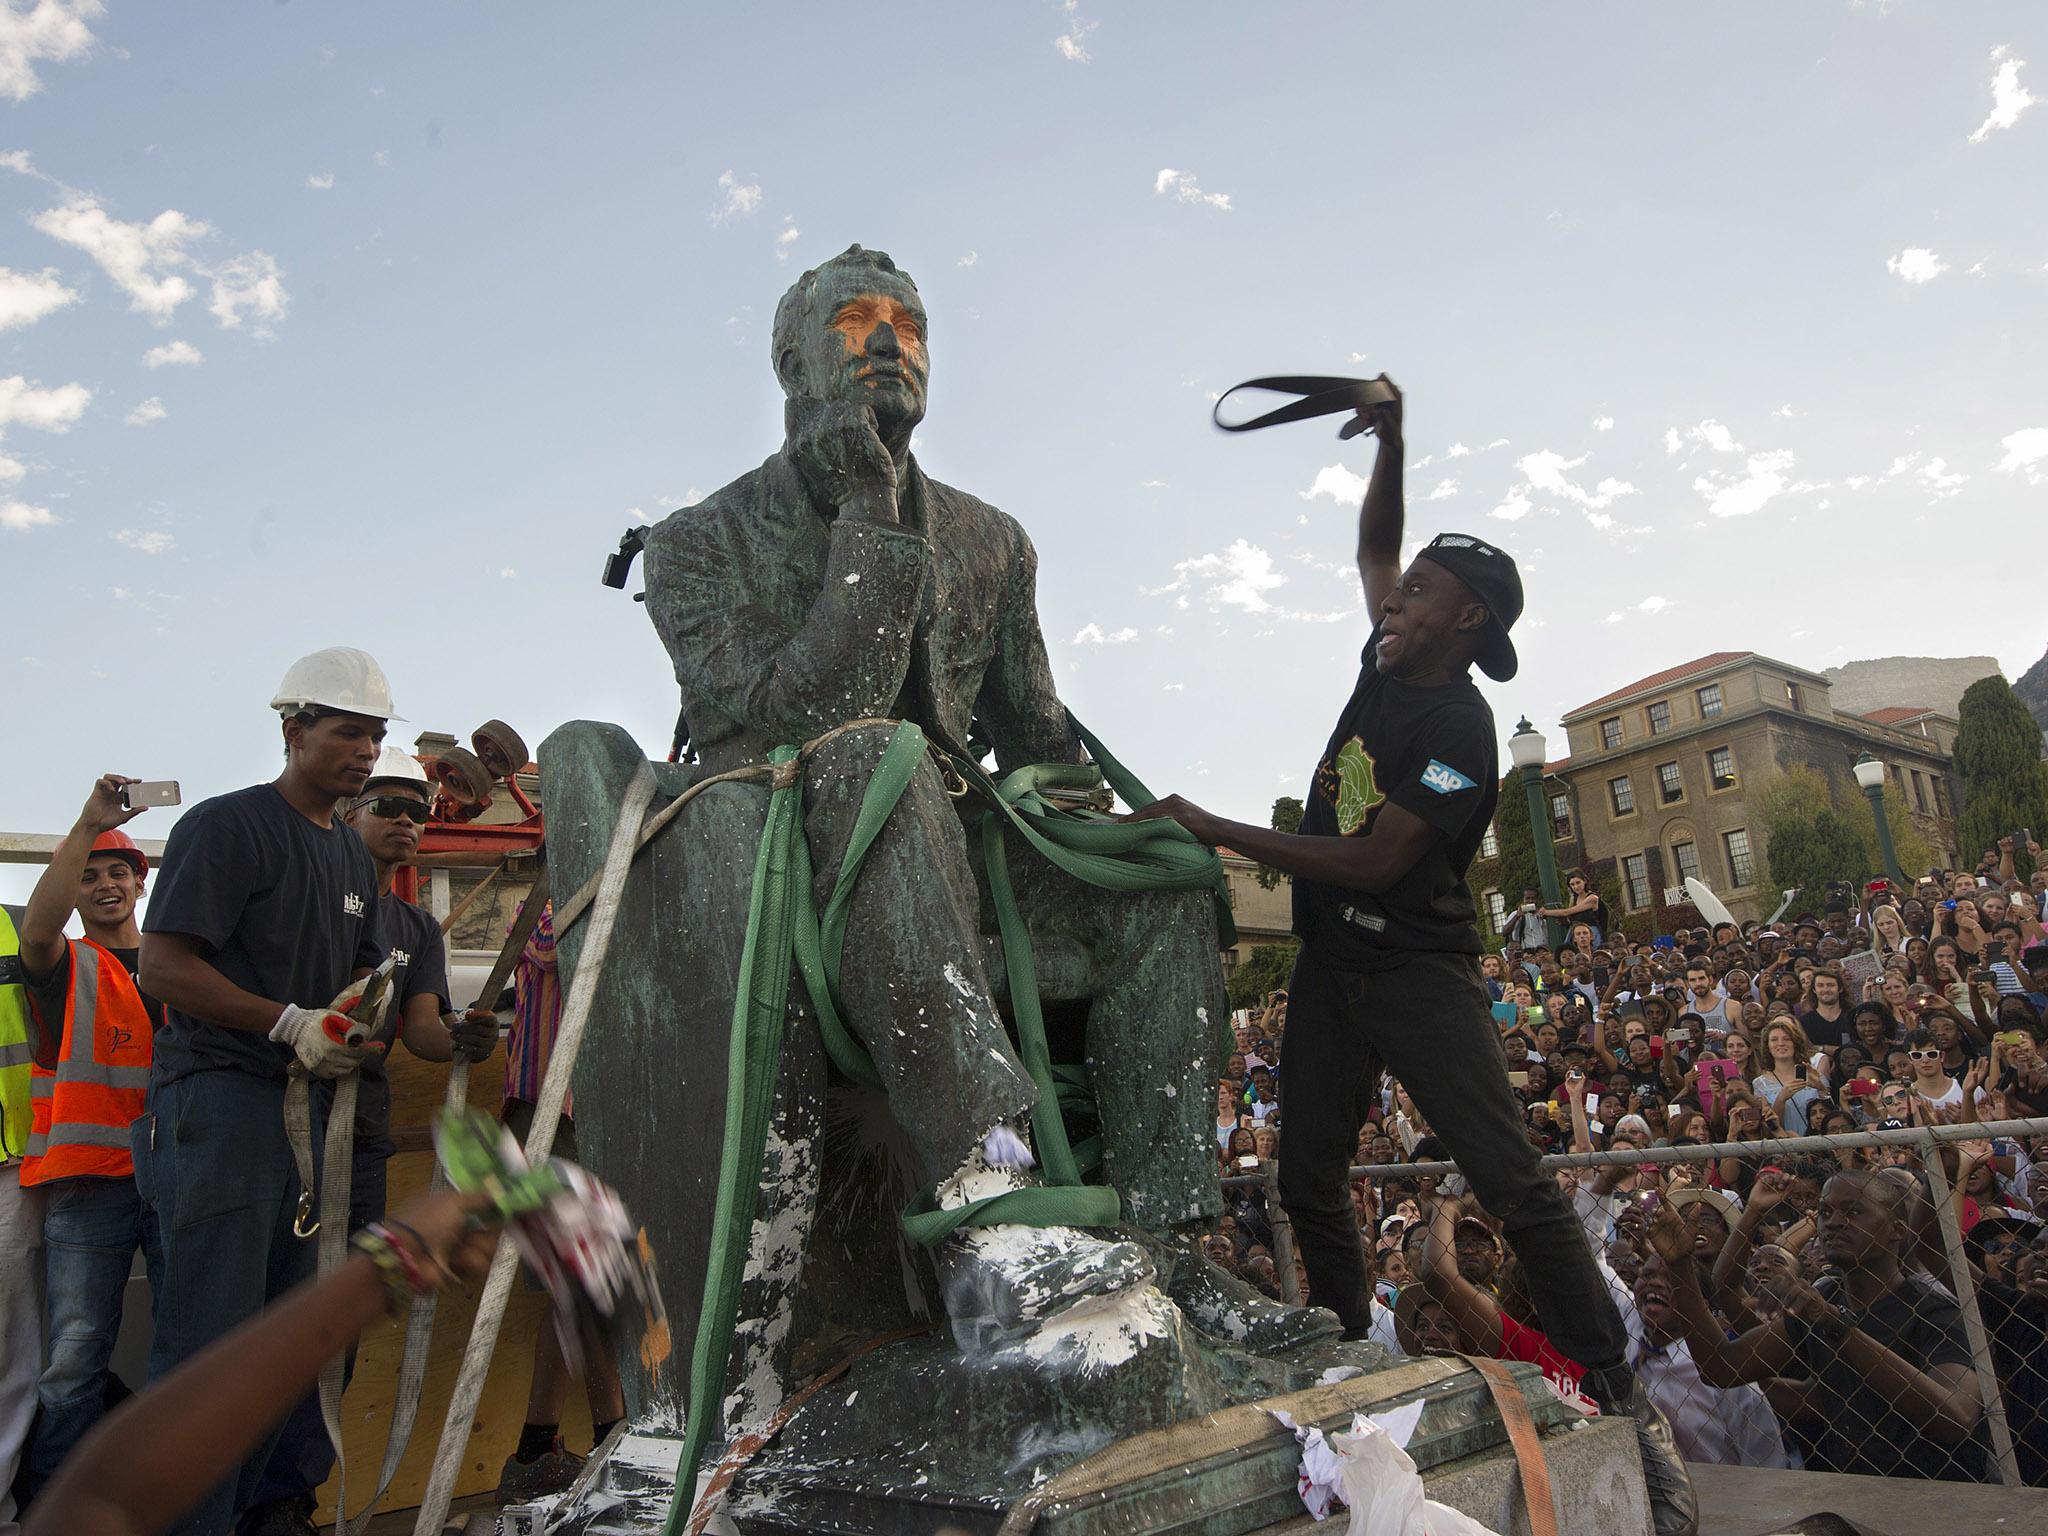 &#13;
The Rhodes Must Fall campaign started with the removal of a Cecil Rhodes statue in South Africa last year &#13;